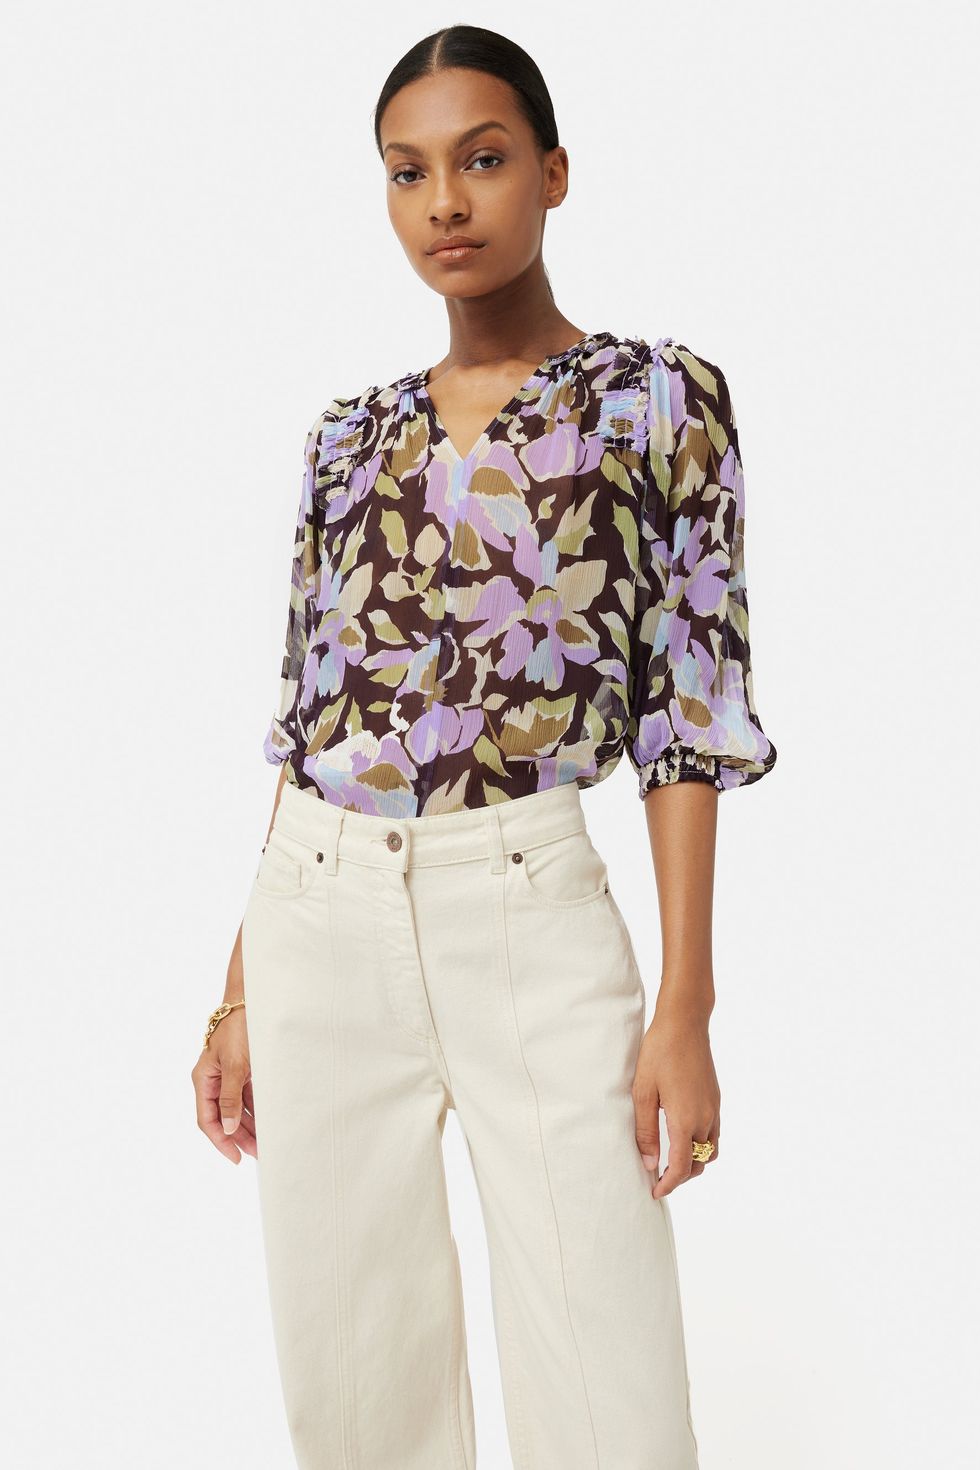 Best blouses 2023 UK: The best women's blouses to shop now